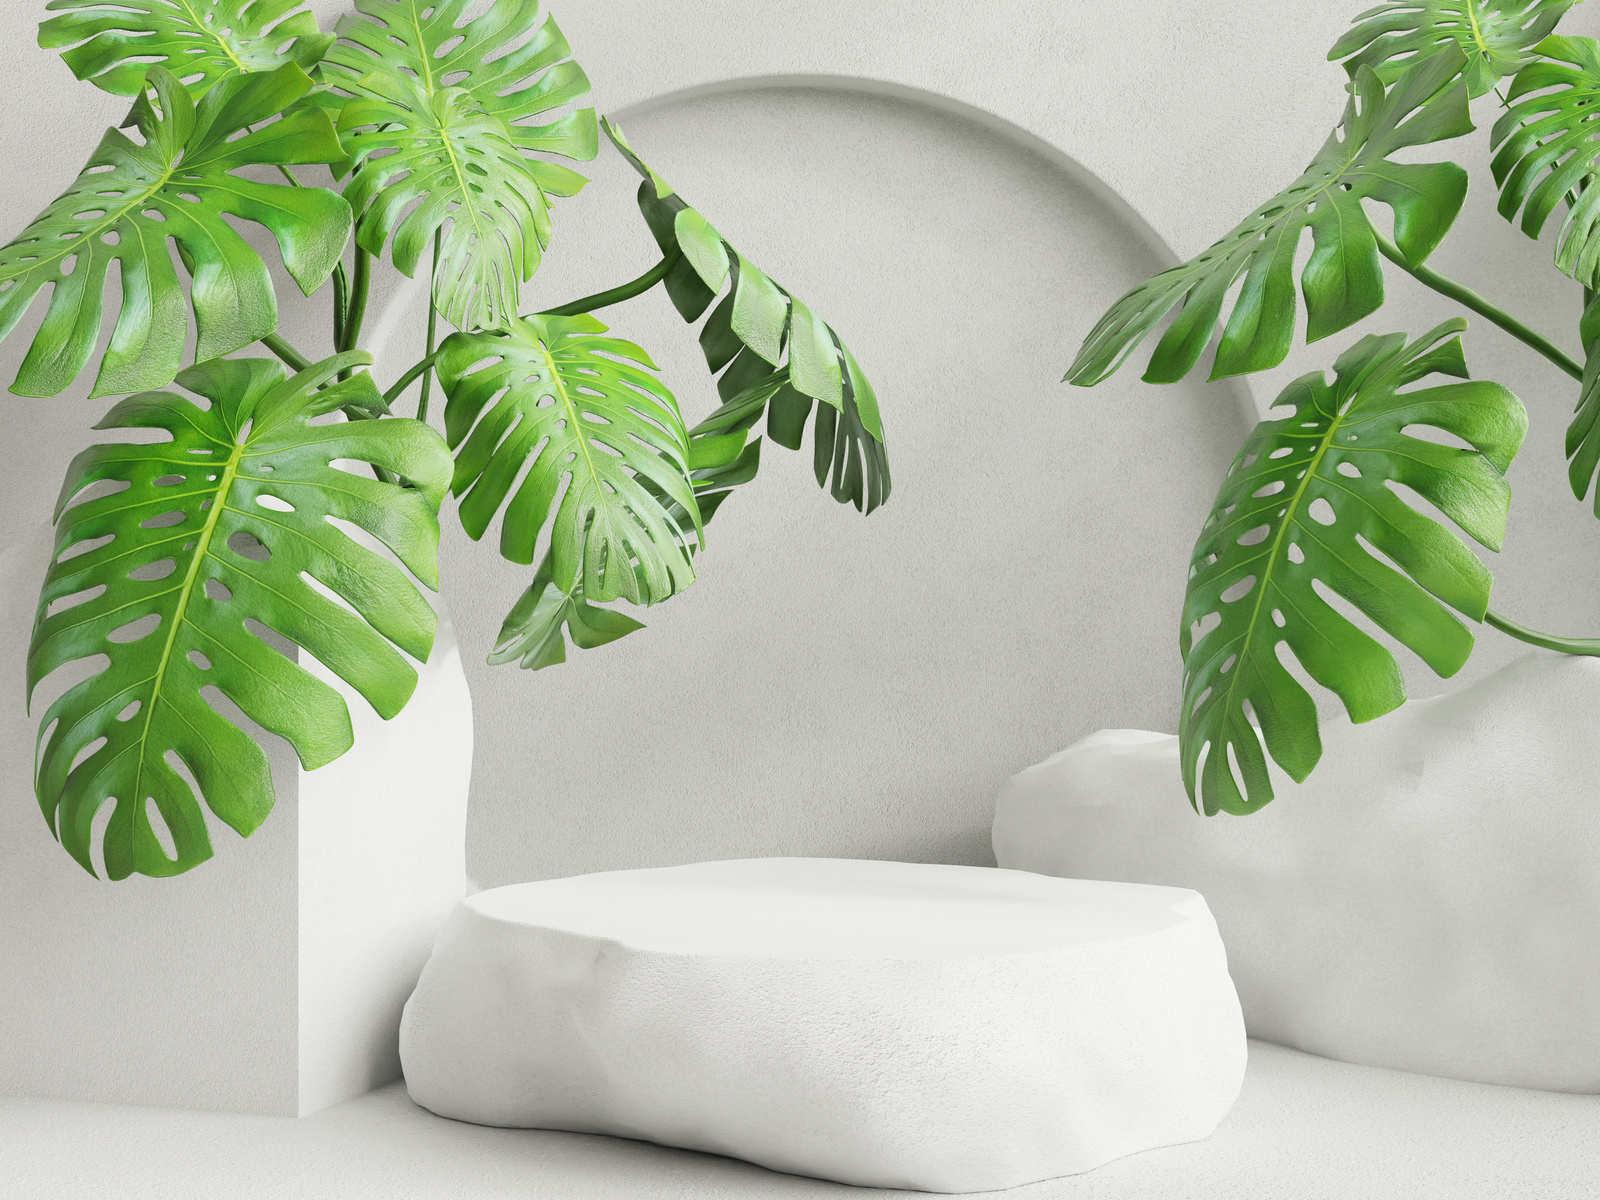 3D Display Podium with Monstera Leaves